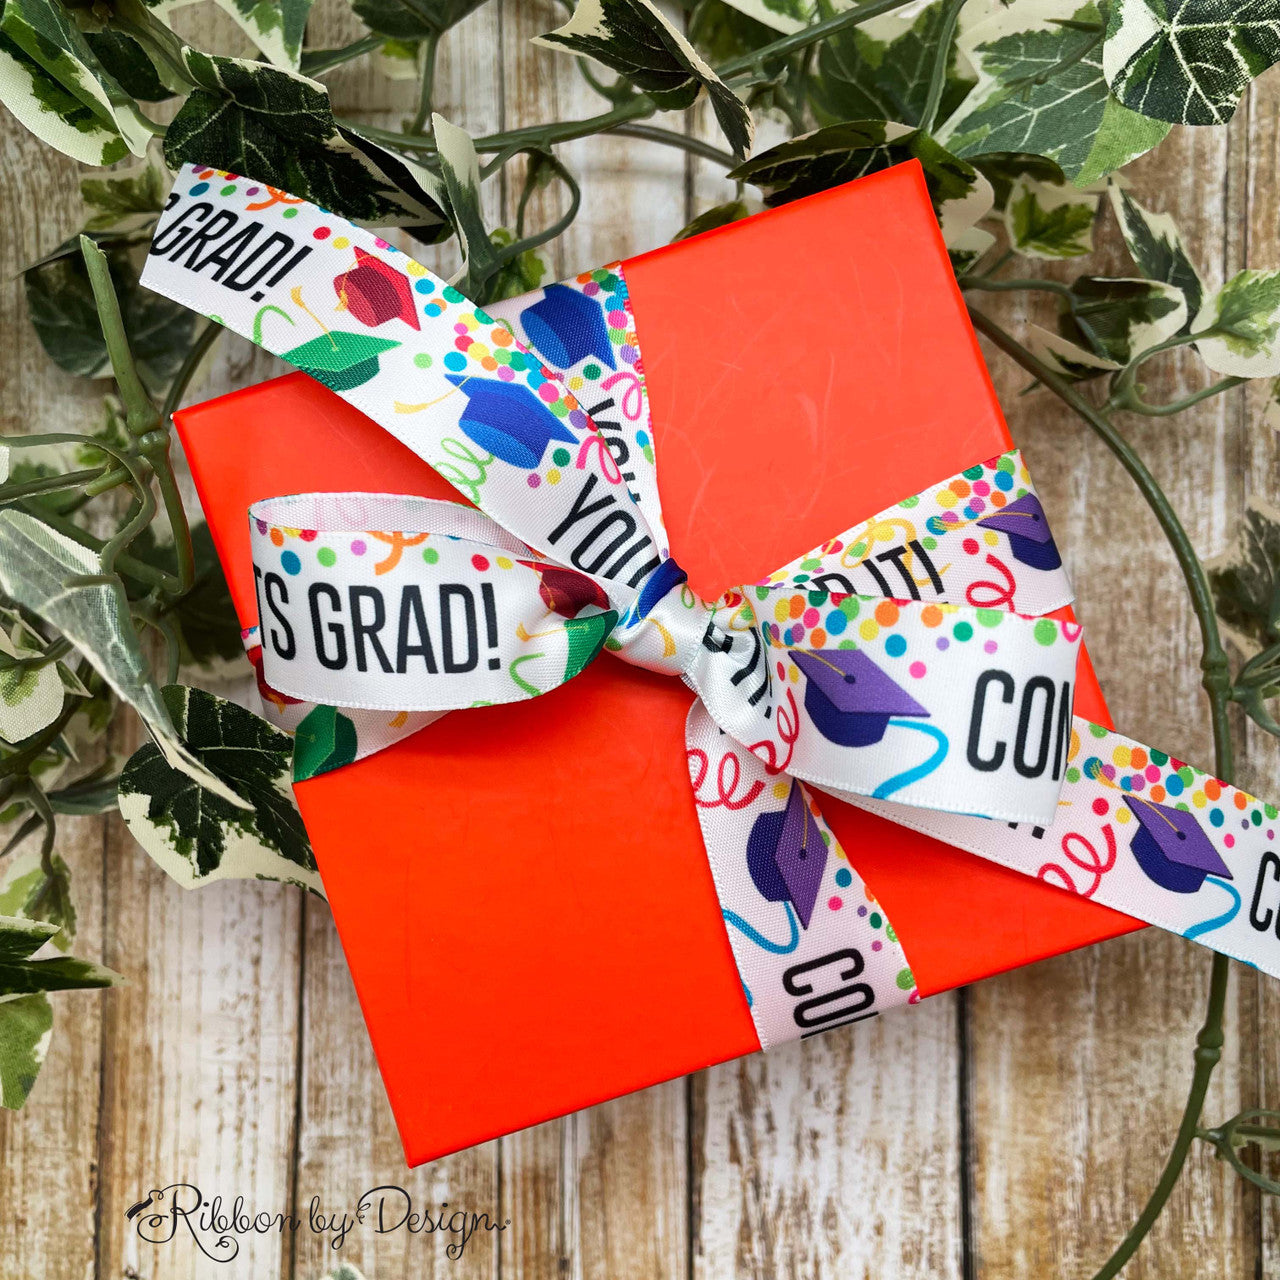 Tie a beautiful bow on a graduation gift to elevate the celebration!